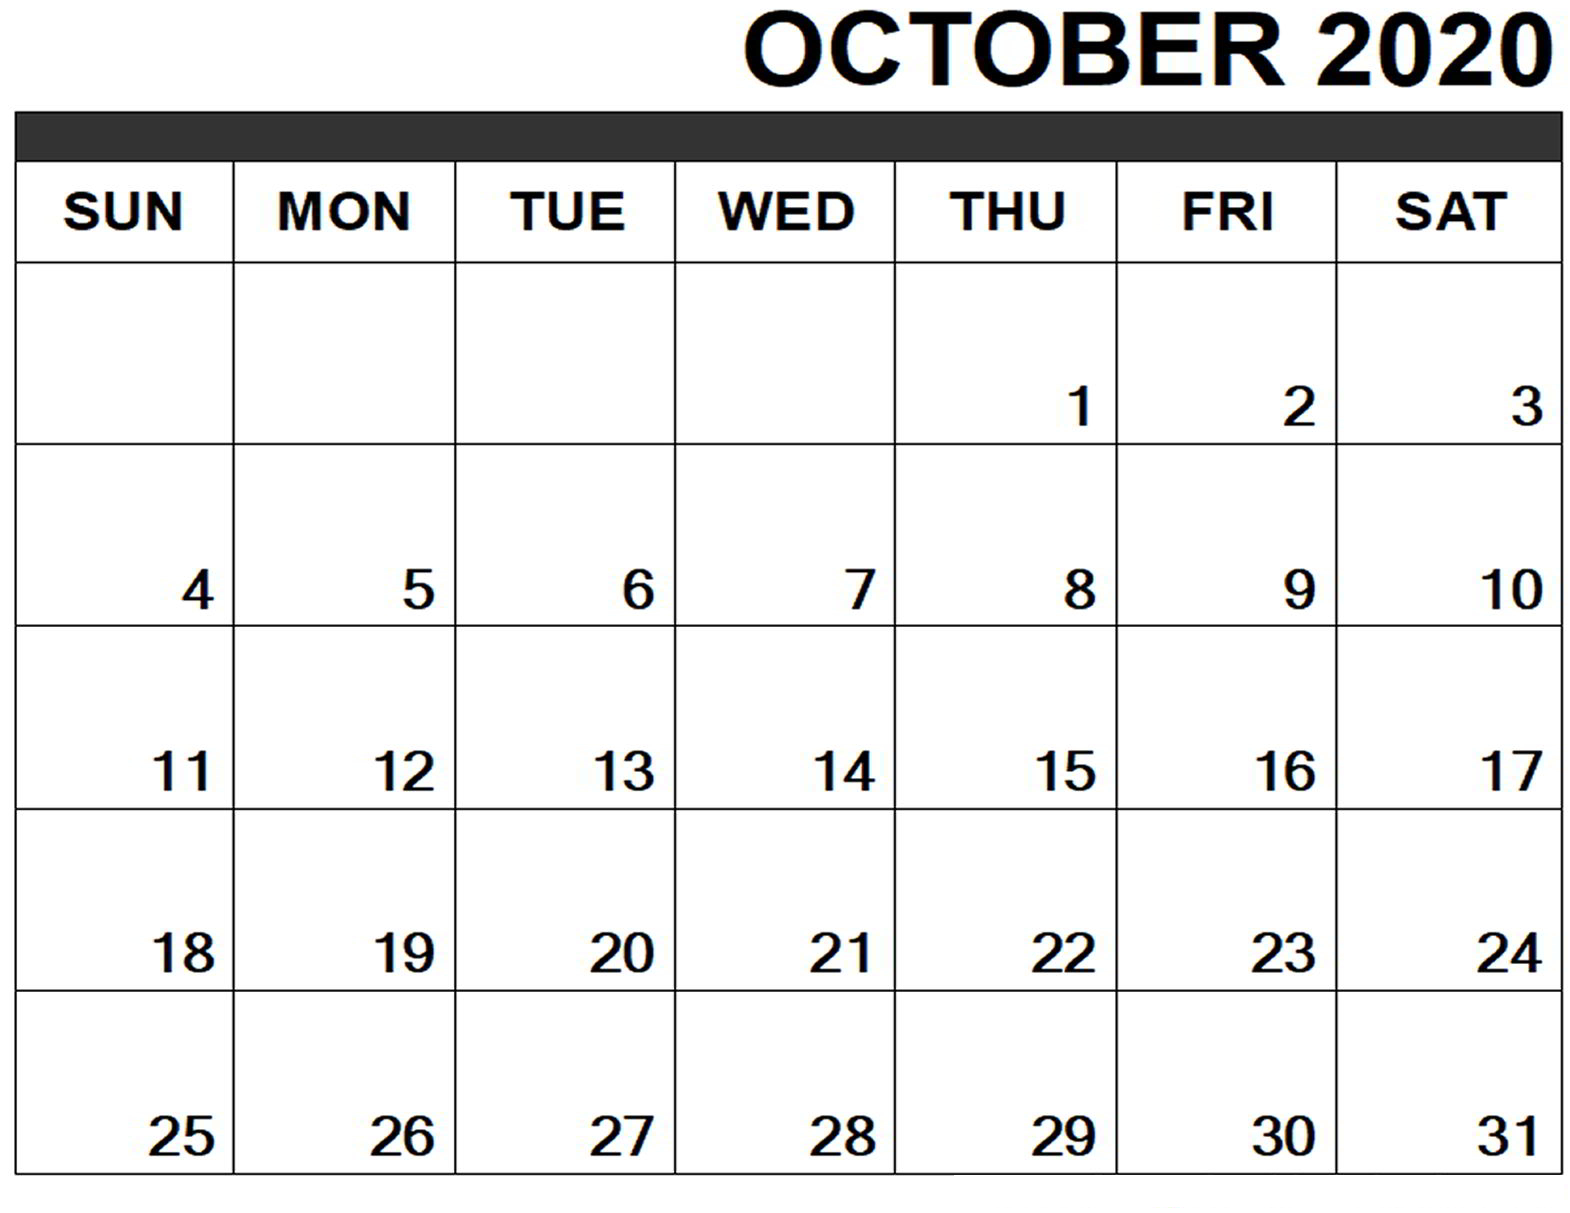 October 2020 Calendar Printable Tips You Will Read This Year